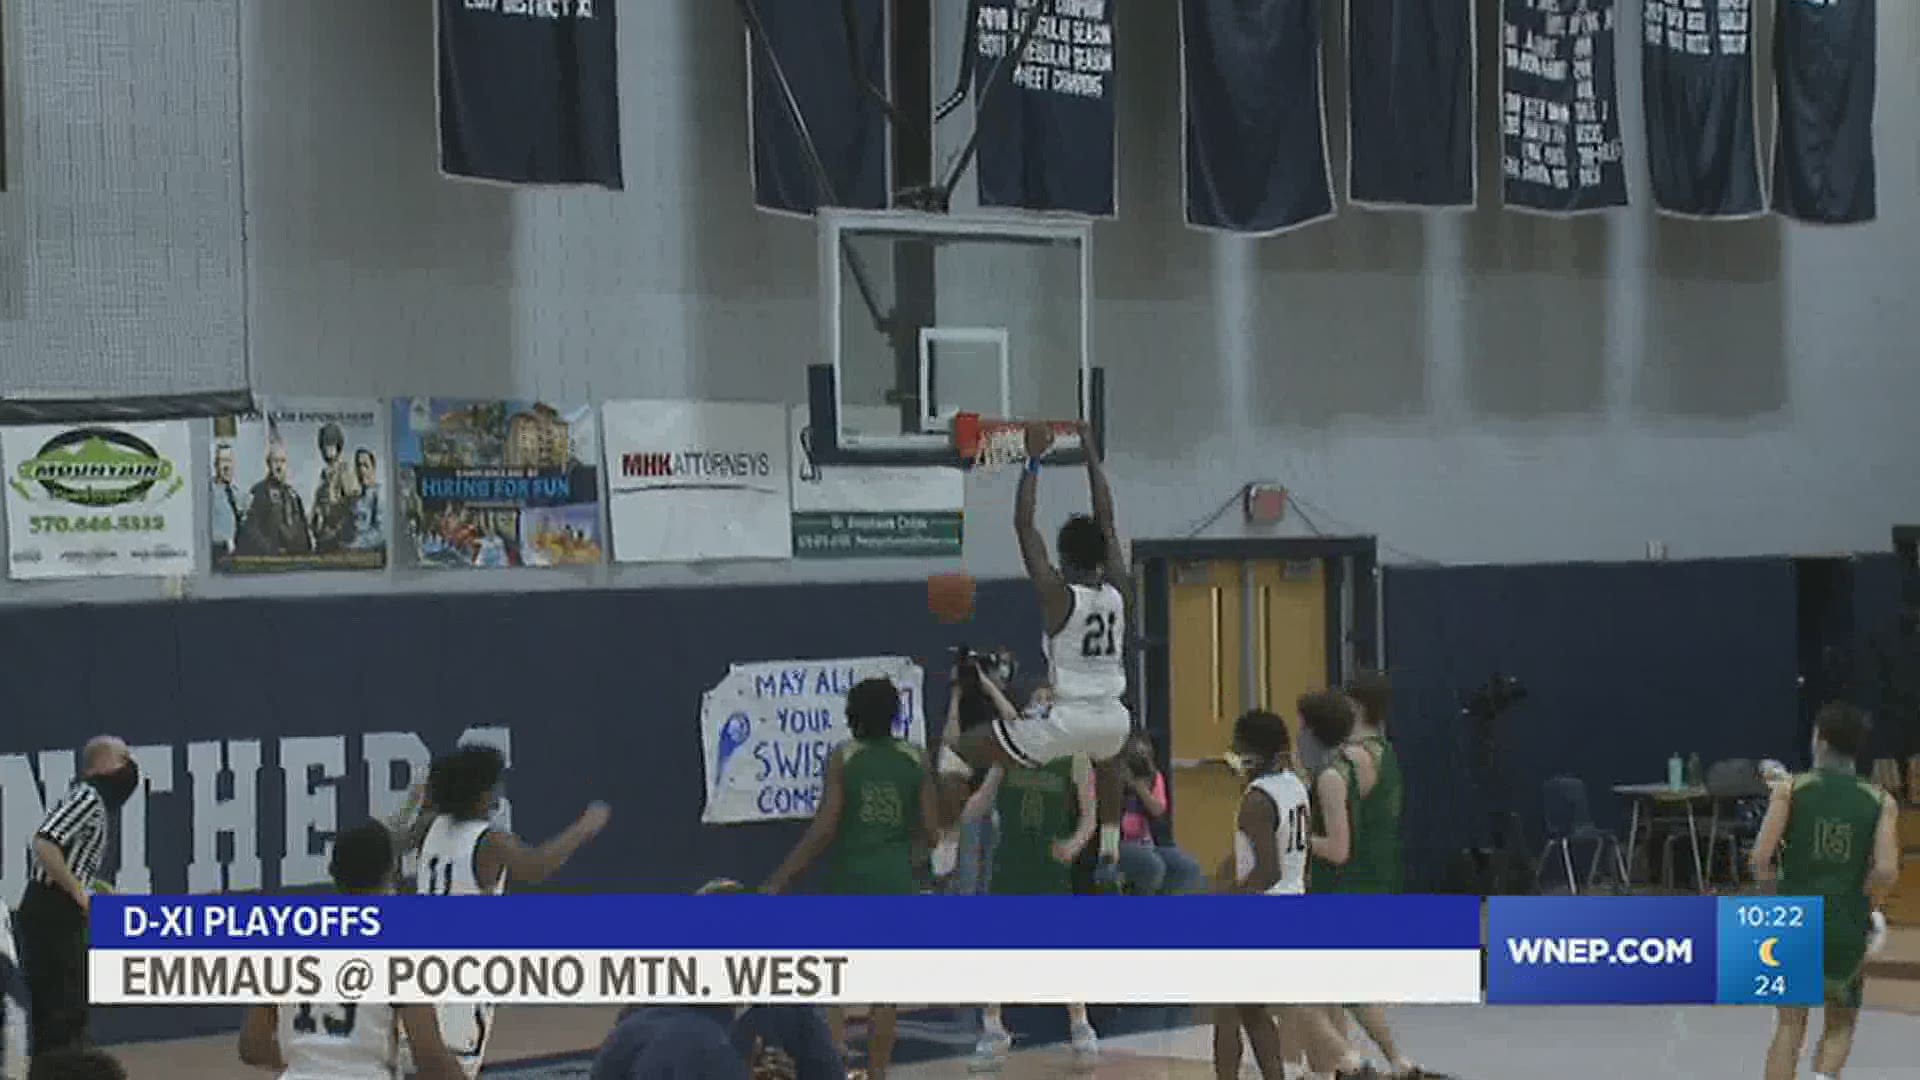 Pocono Mountain West the #1 seed in the D-11 playoffs eased past Emmaus 58-33 in boys HS basketball